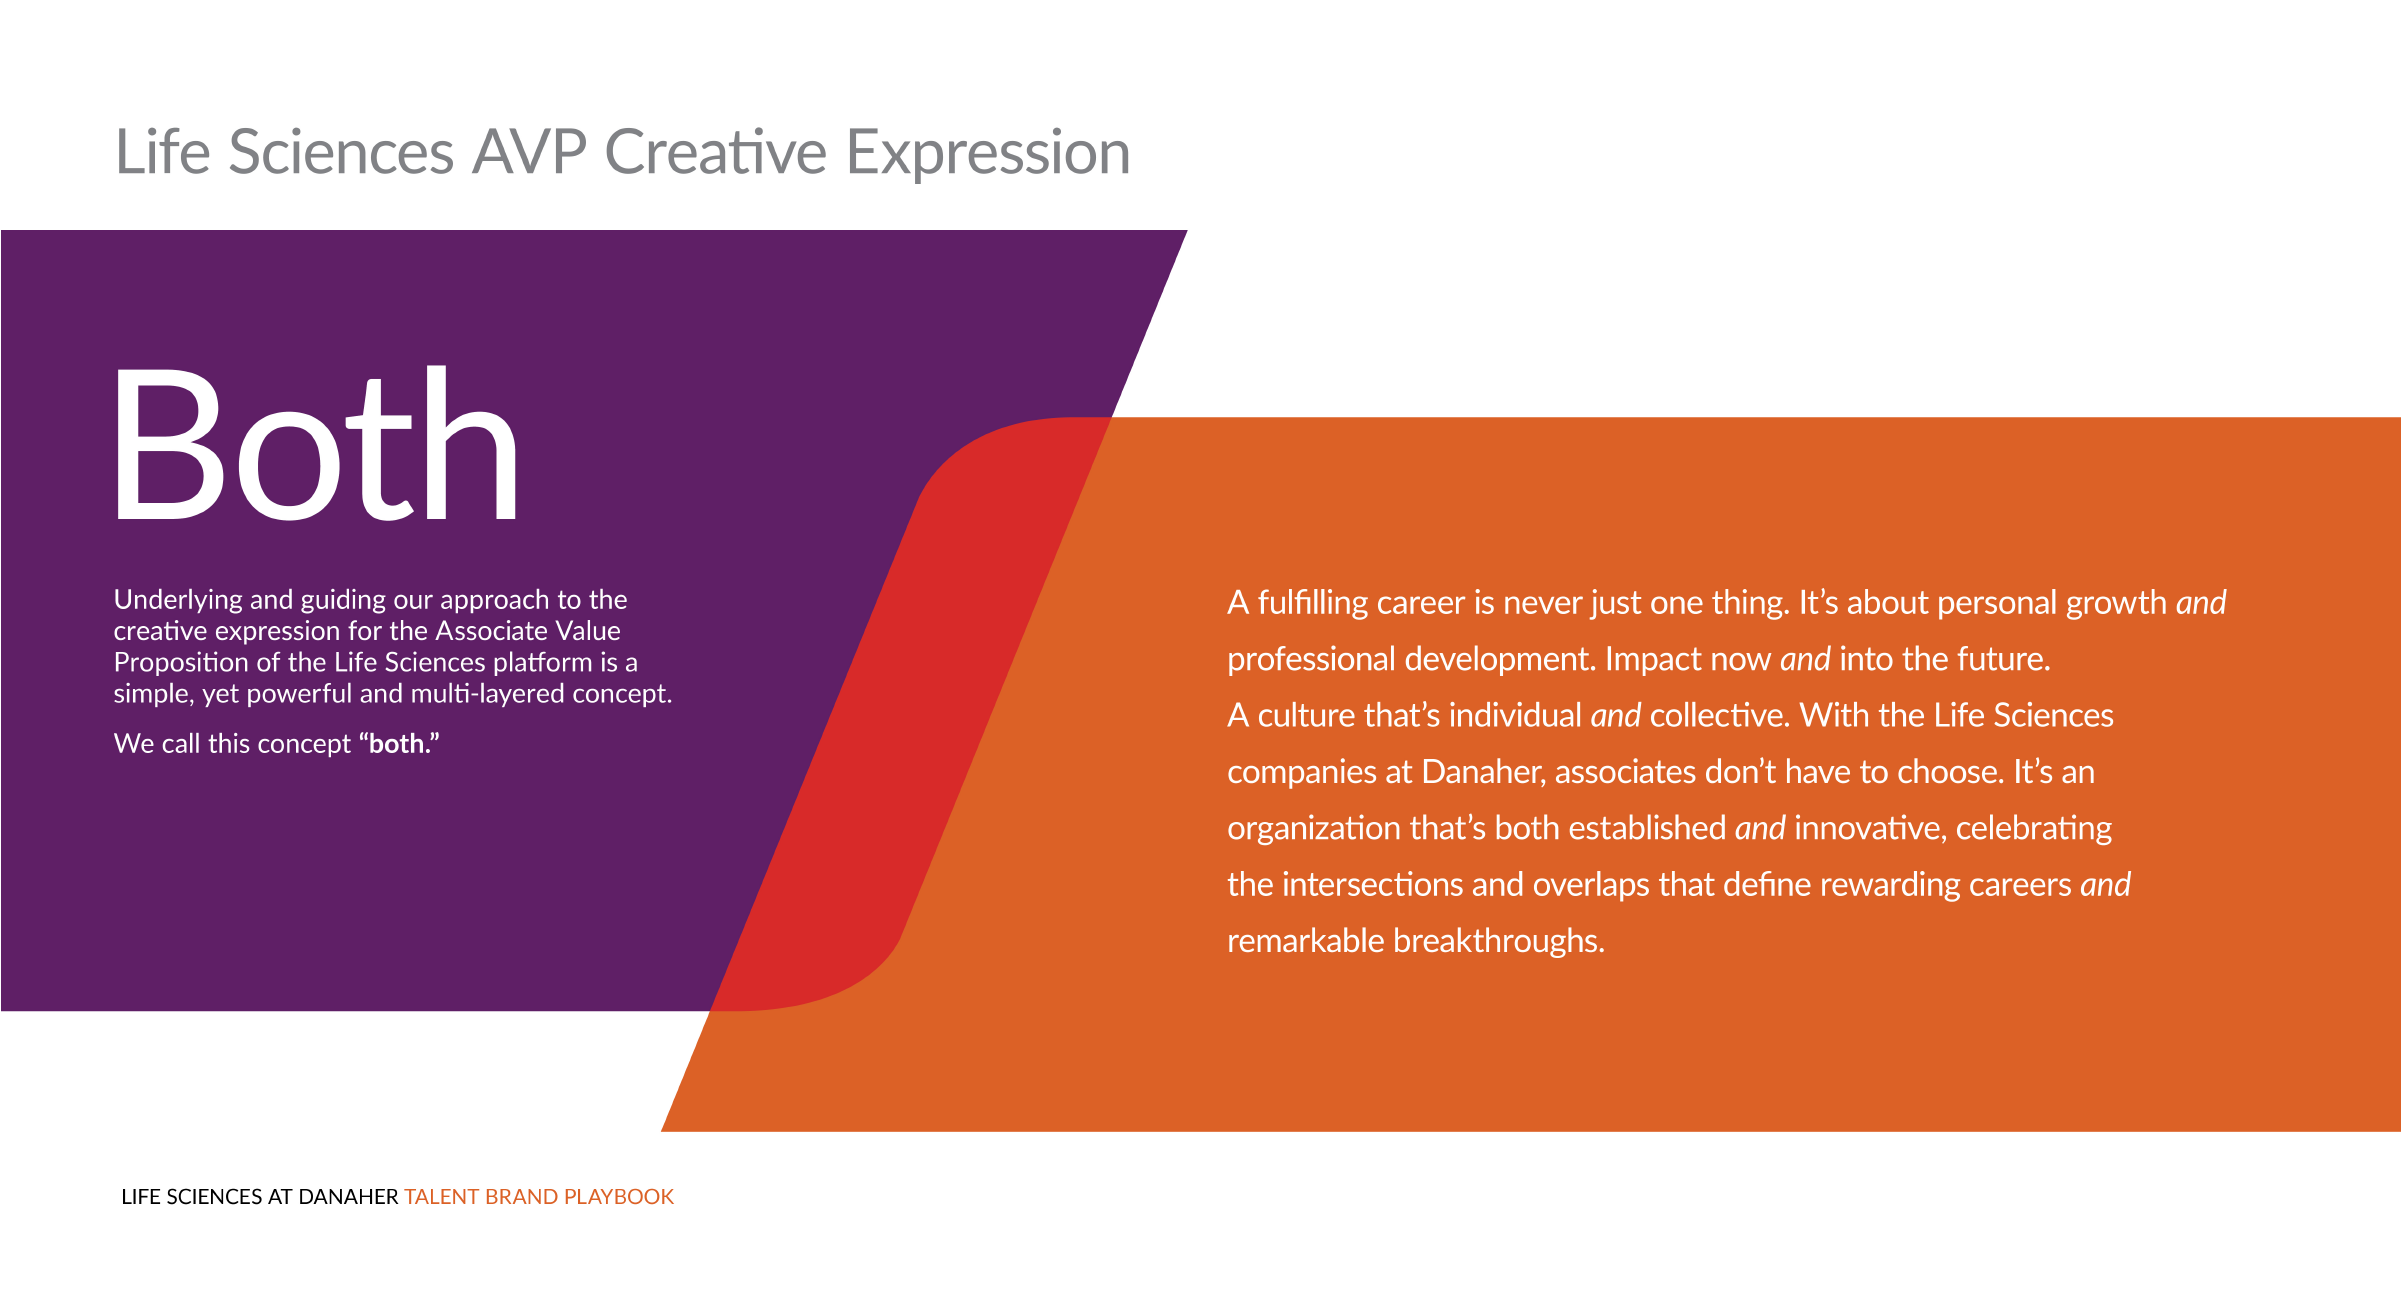 Purple and orange shapes overlaying with the copy "Life Sciences AVP Creative Expression: Both. Underlying and guiding our approach to the creative expression for the Associate Value Proposition of the Life Sciences platform is a simple, yet powerful and multi-layered concept. We call this concept 'both.' A fulfilling career is never just one thing. It’s about personal growth and professional development. Impact now and into the future. A culture that’s individual and collective. With the Life Sciences companies at Danaher, associates don’t have to choose. It’s an organization that’s both established and innovative, celebrating the intersections and overlaps that define rewarding careers and remarkable breakthroughs.